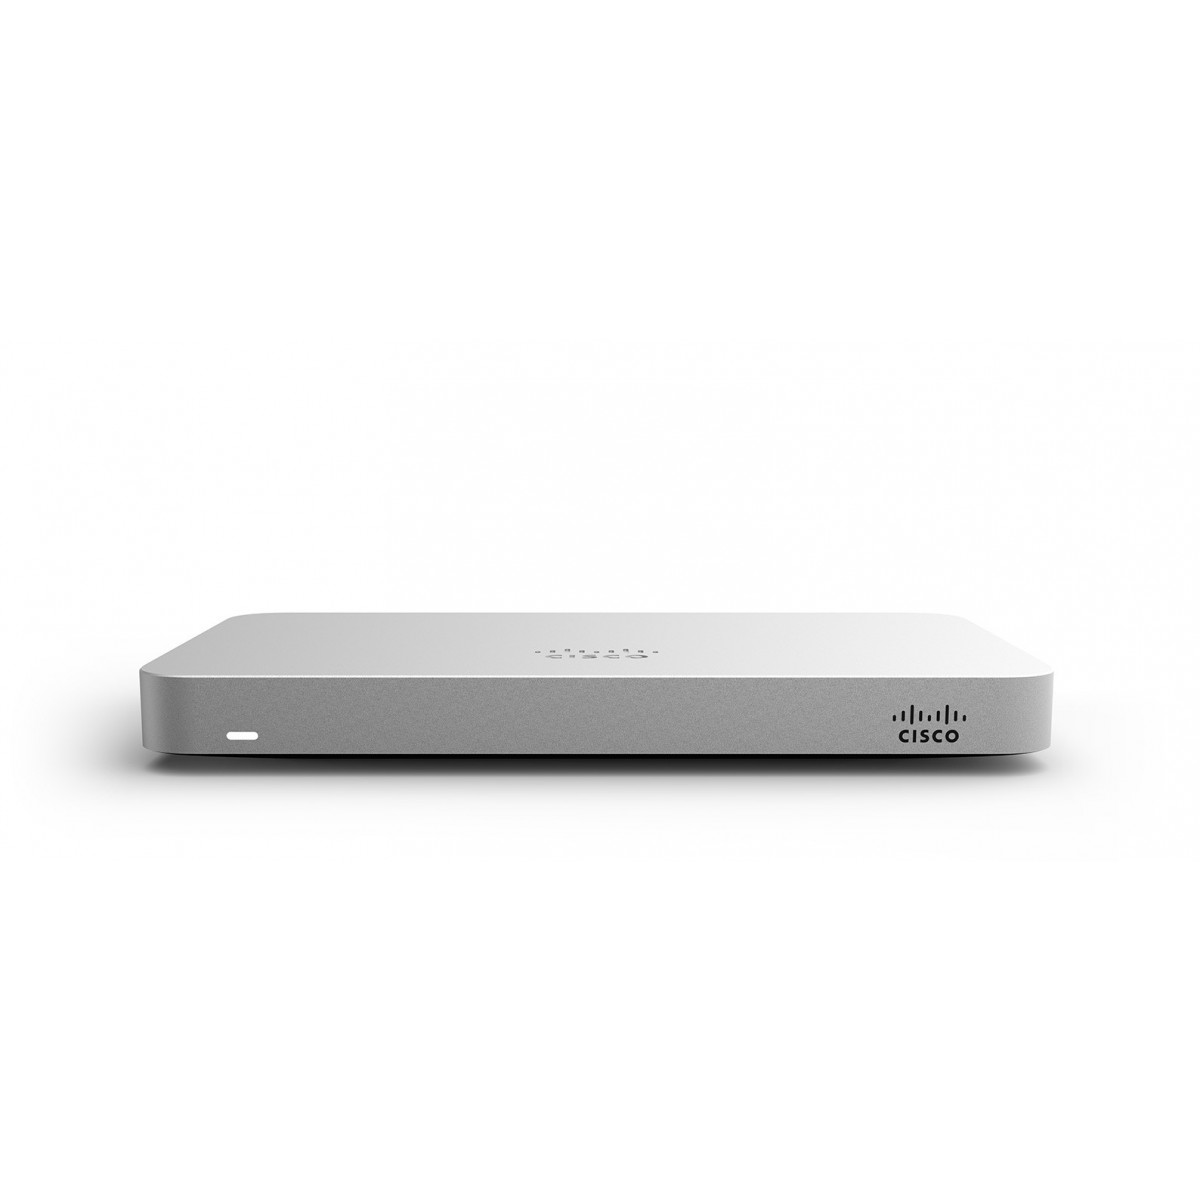 Cisco MX64 Cloud Managed Security Appliance - 250 Mbit/s - 100 Mbit/s - 50 user(s) - Wired - Ethernet (RJ-45) - 4 W